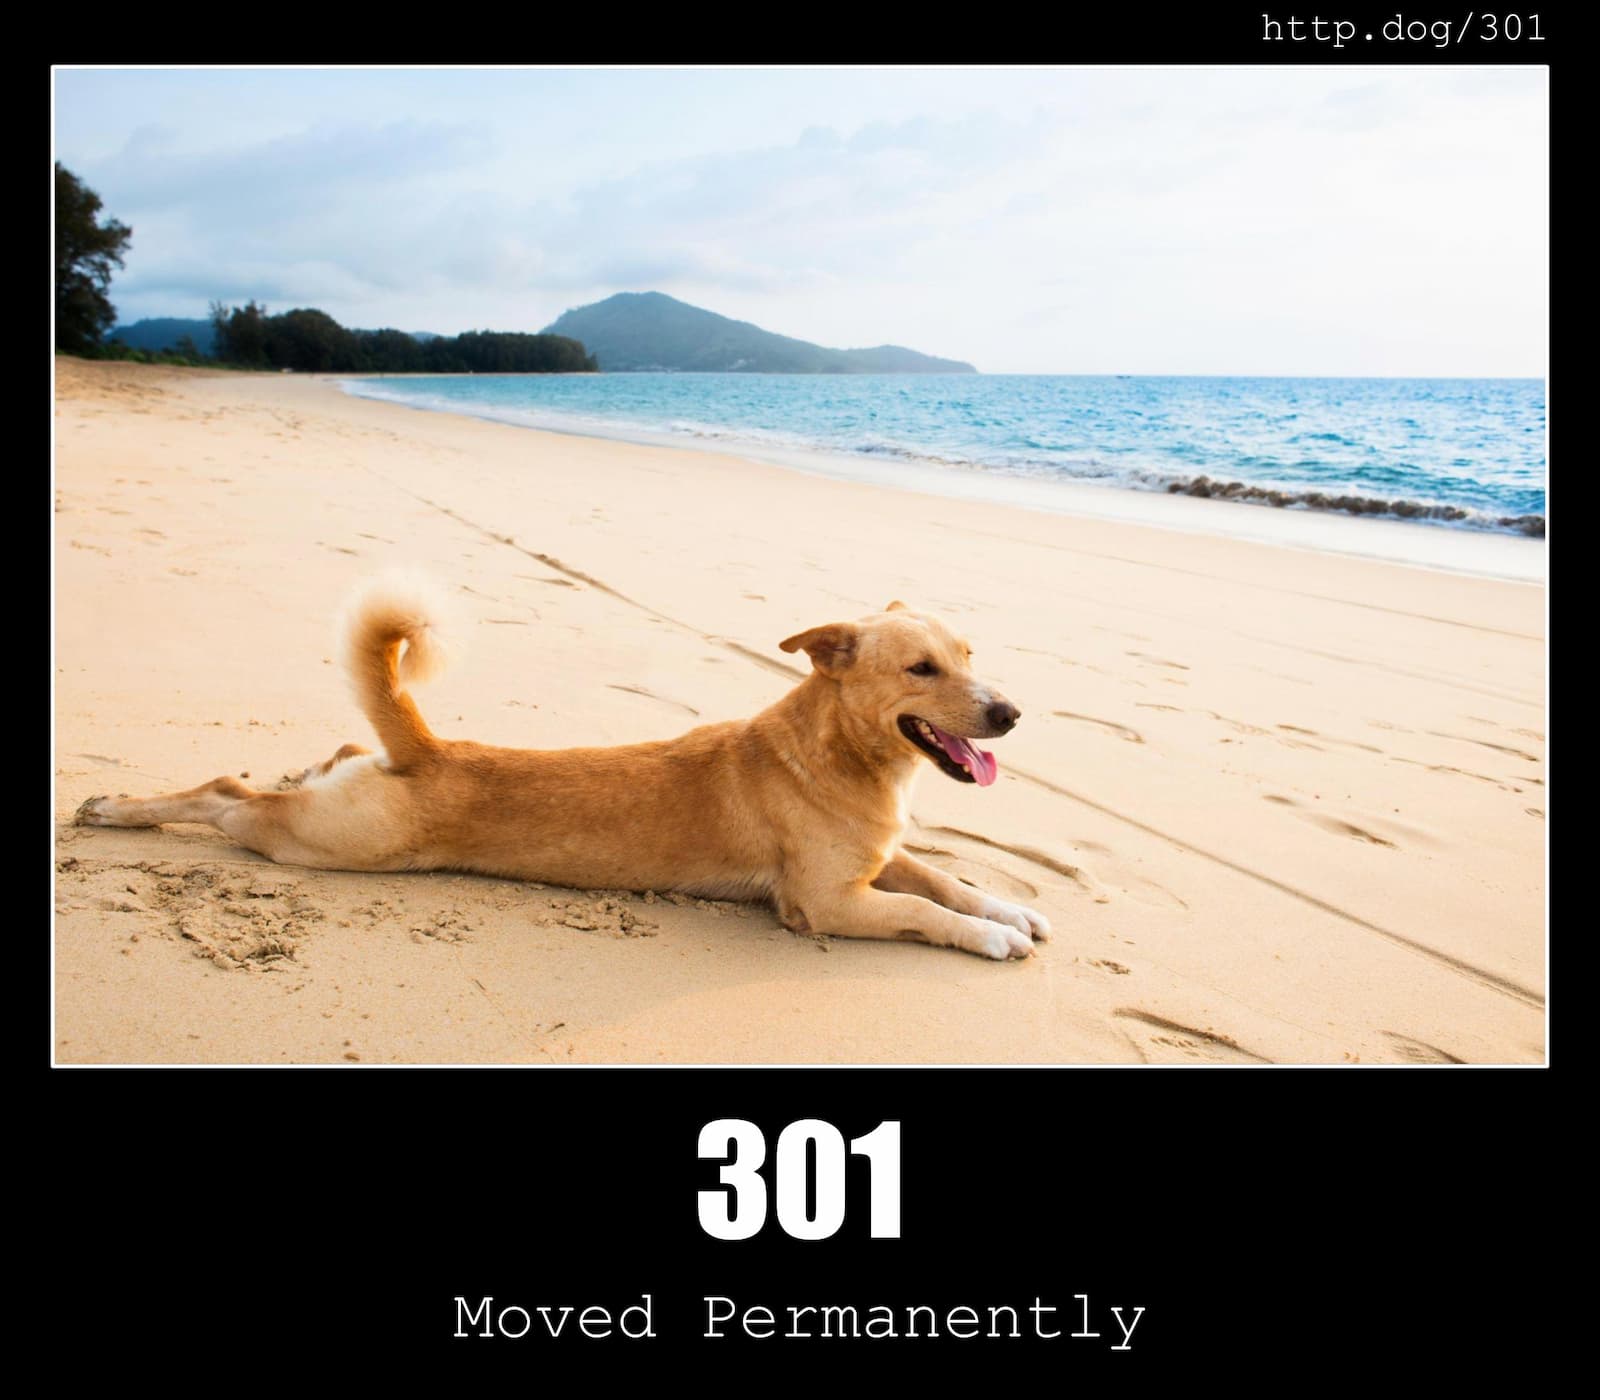 HTTP Status Code 301 Moved Permanently & Dogs